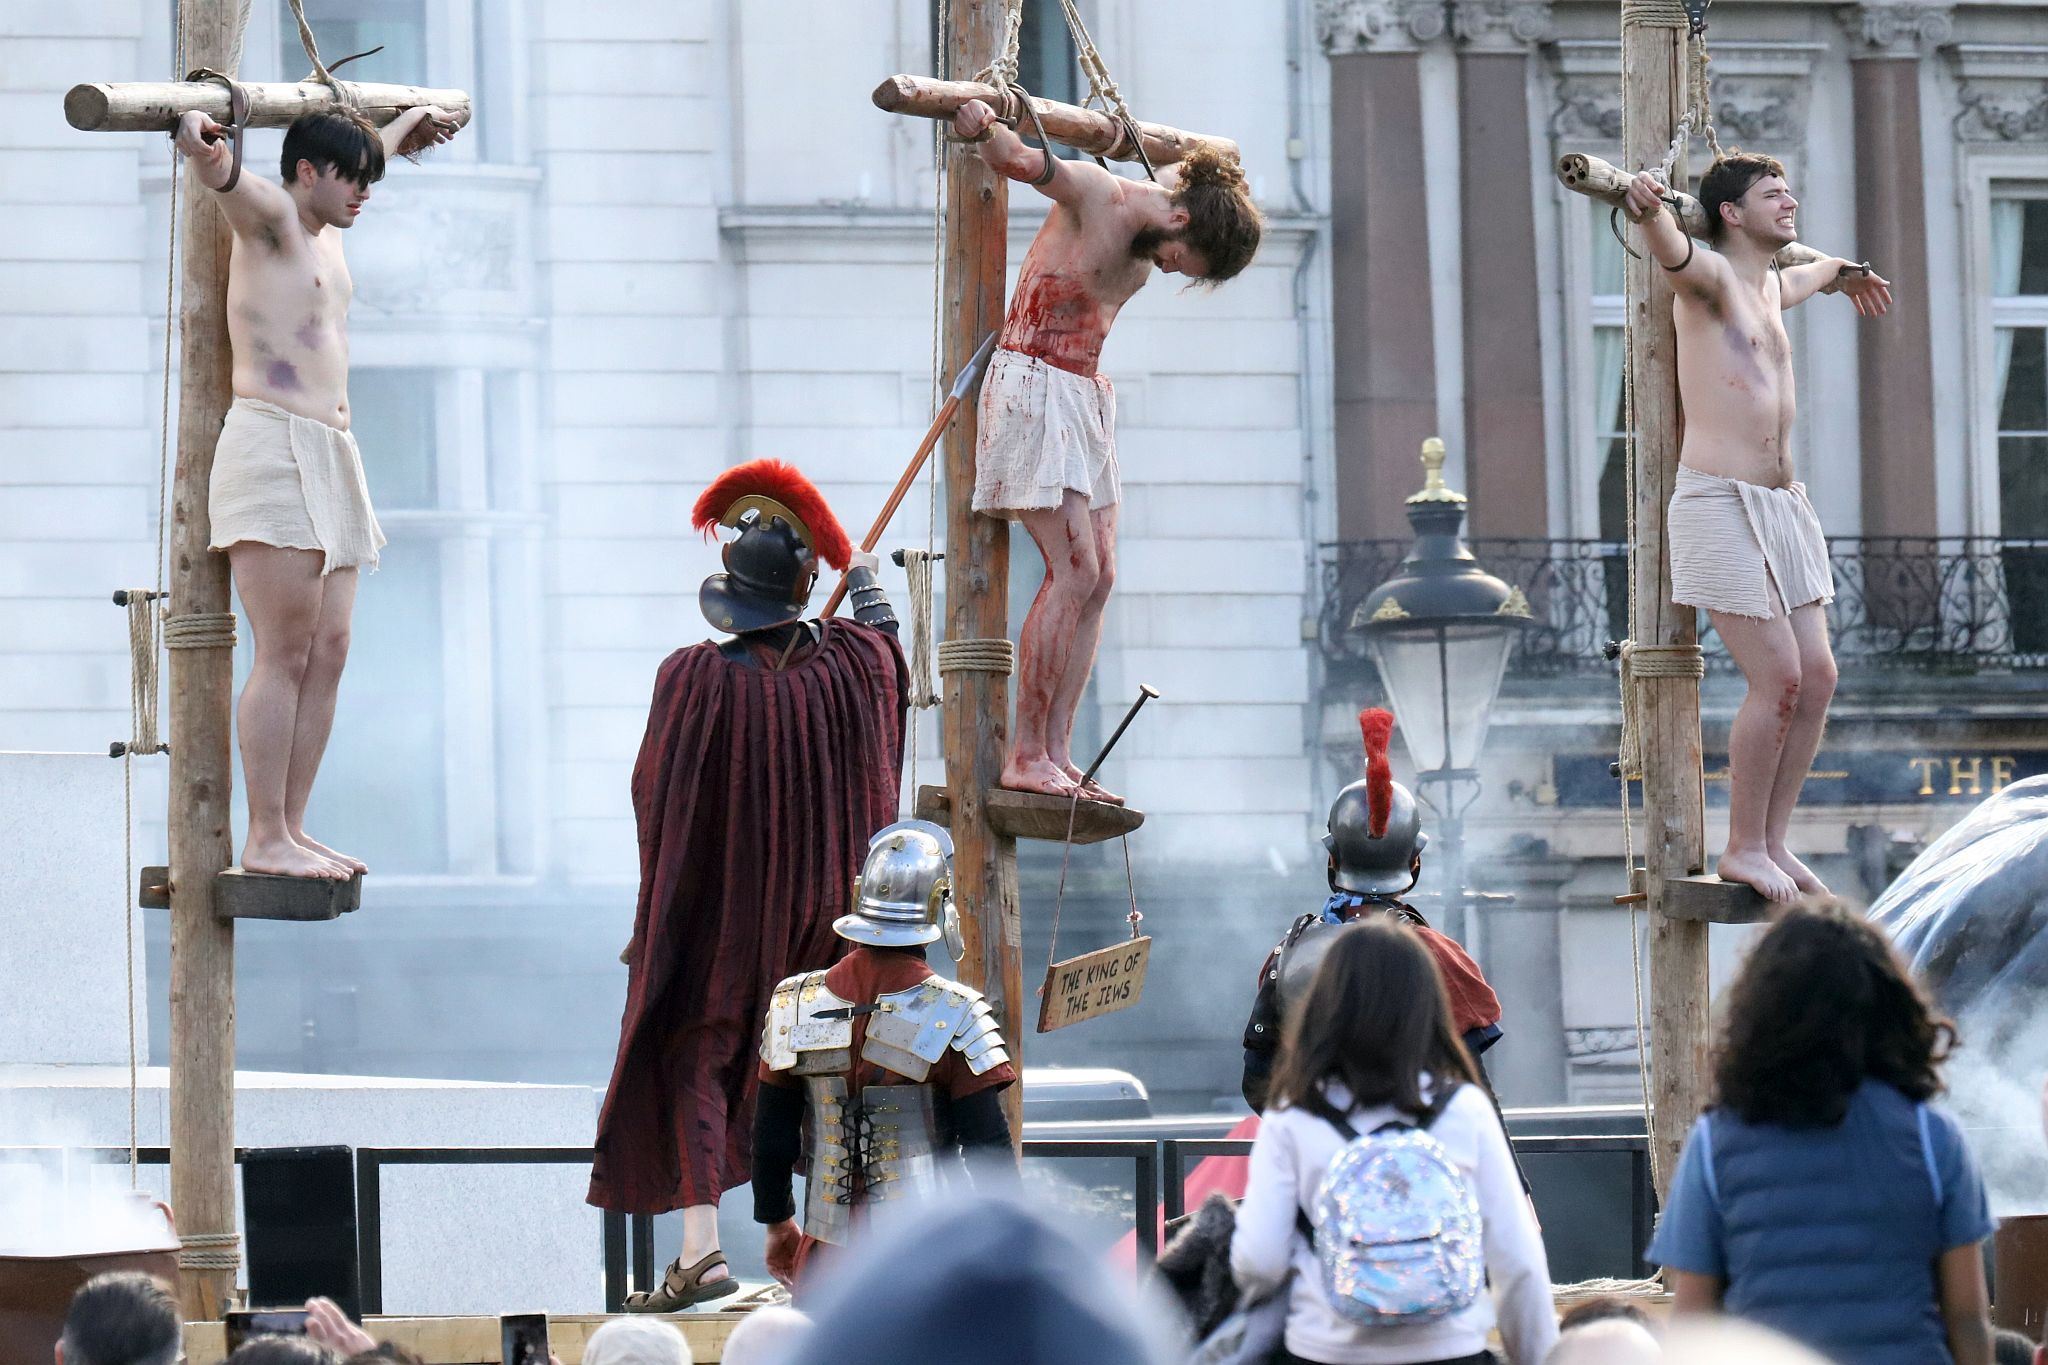 The Good Friday Wintershall Easter Passion Play "The Passion of Jesus" presented at Trafalgar Square in London. 7th April 2023. A Roman soldier stabs Christ with a spear whilst he is still on the cross to ensure that he is dead.